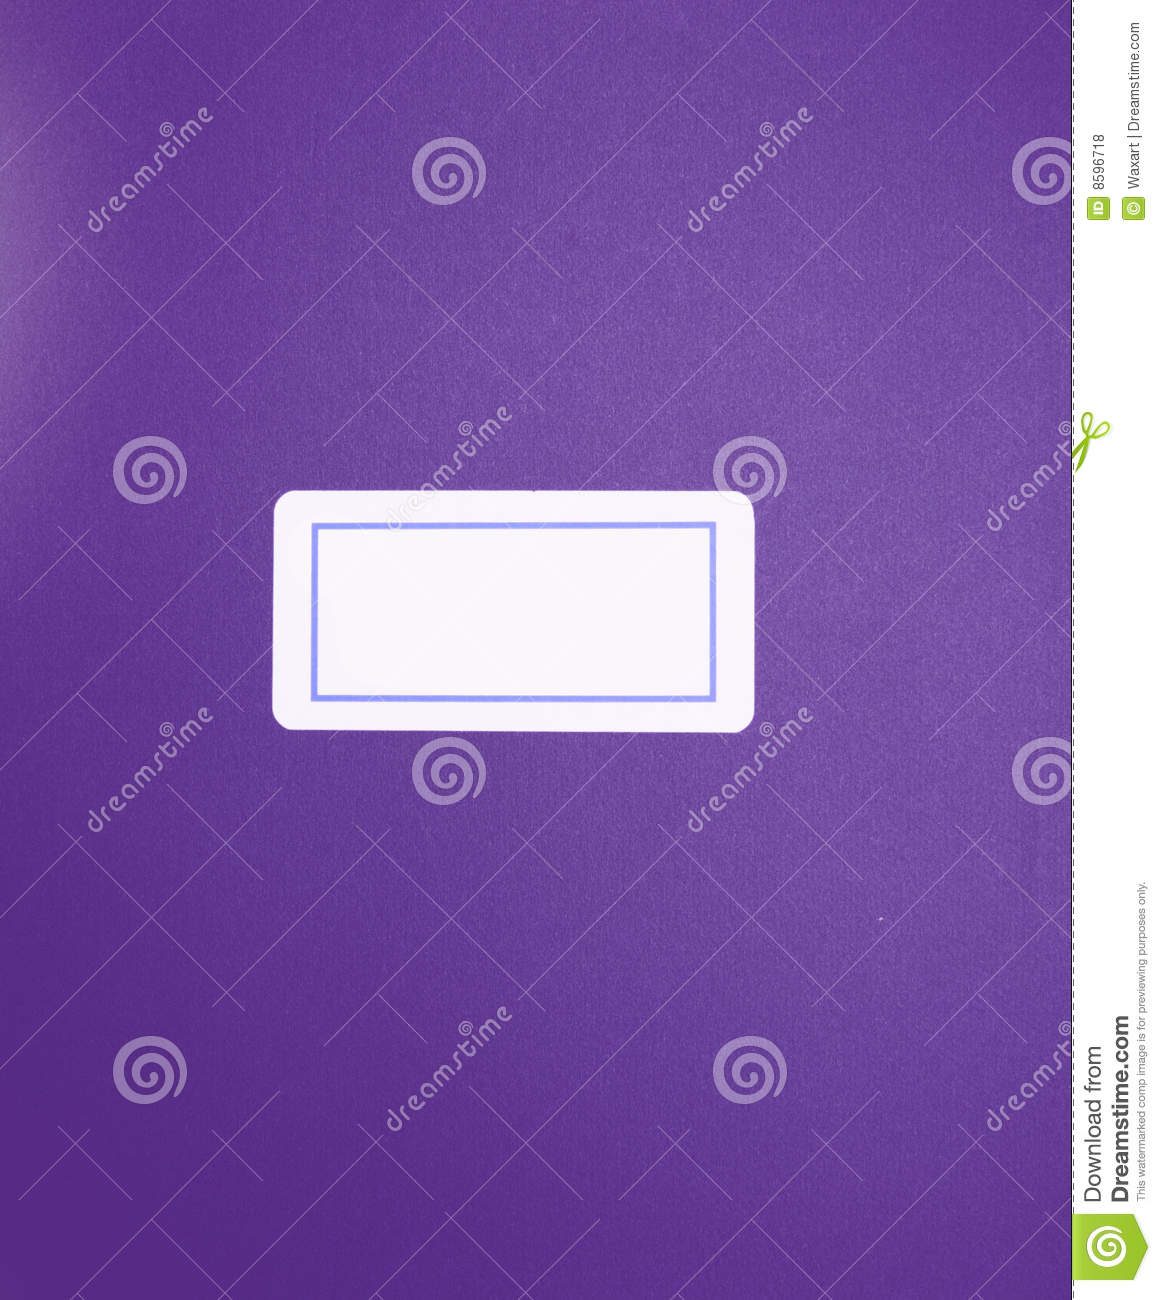 Purple Folder With Blank Label Royalty Free Stock Photos   Image    